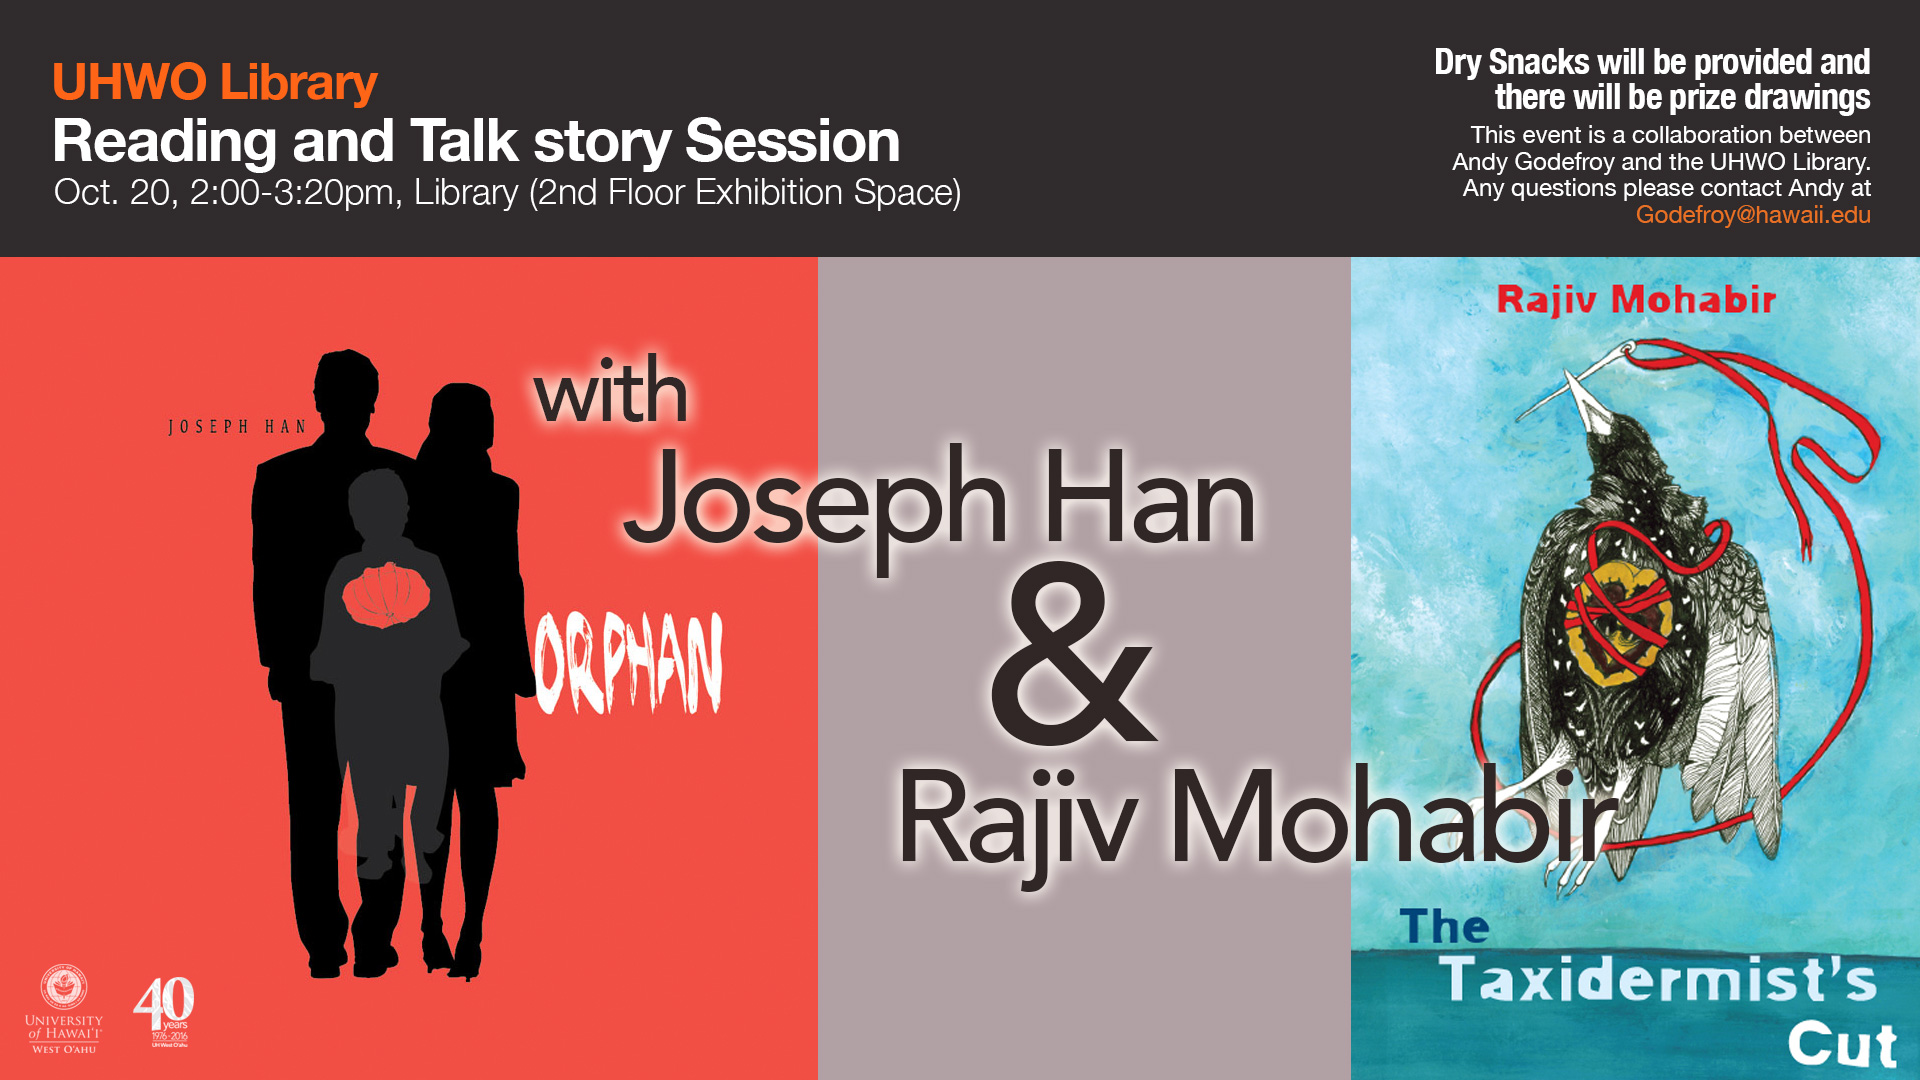 Library Reading & Talk Story Session with Joseph Han and Rajiv Mohabir